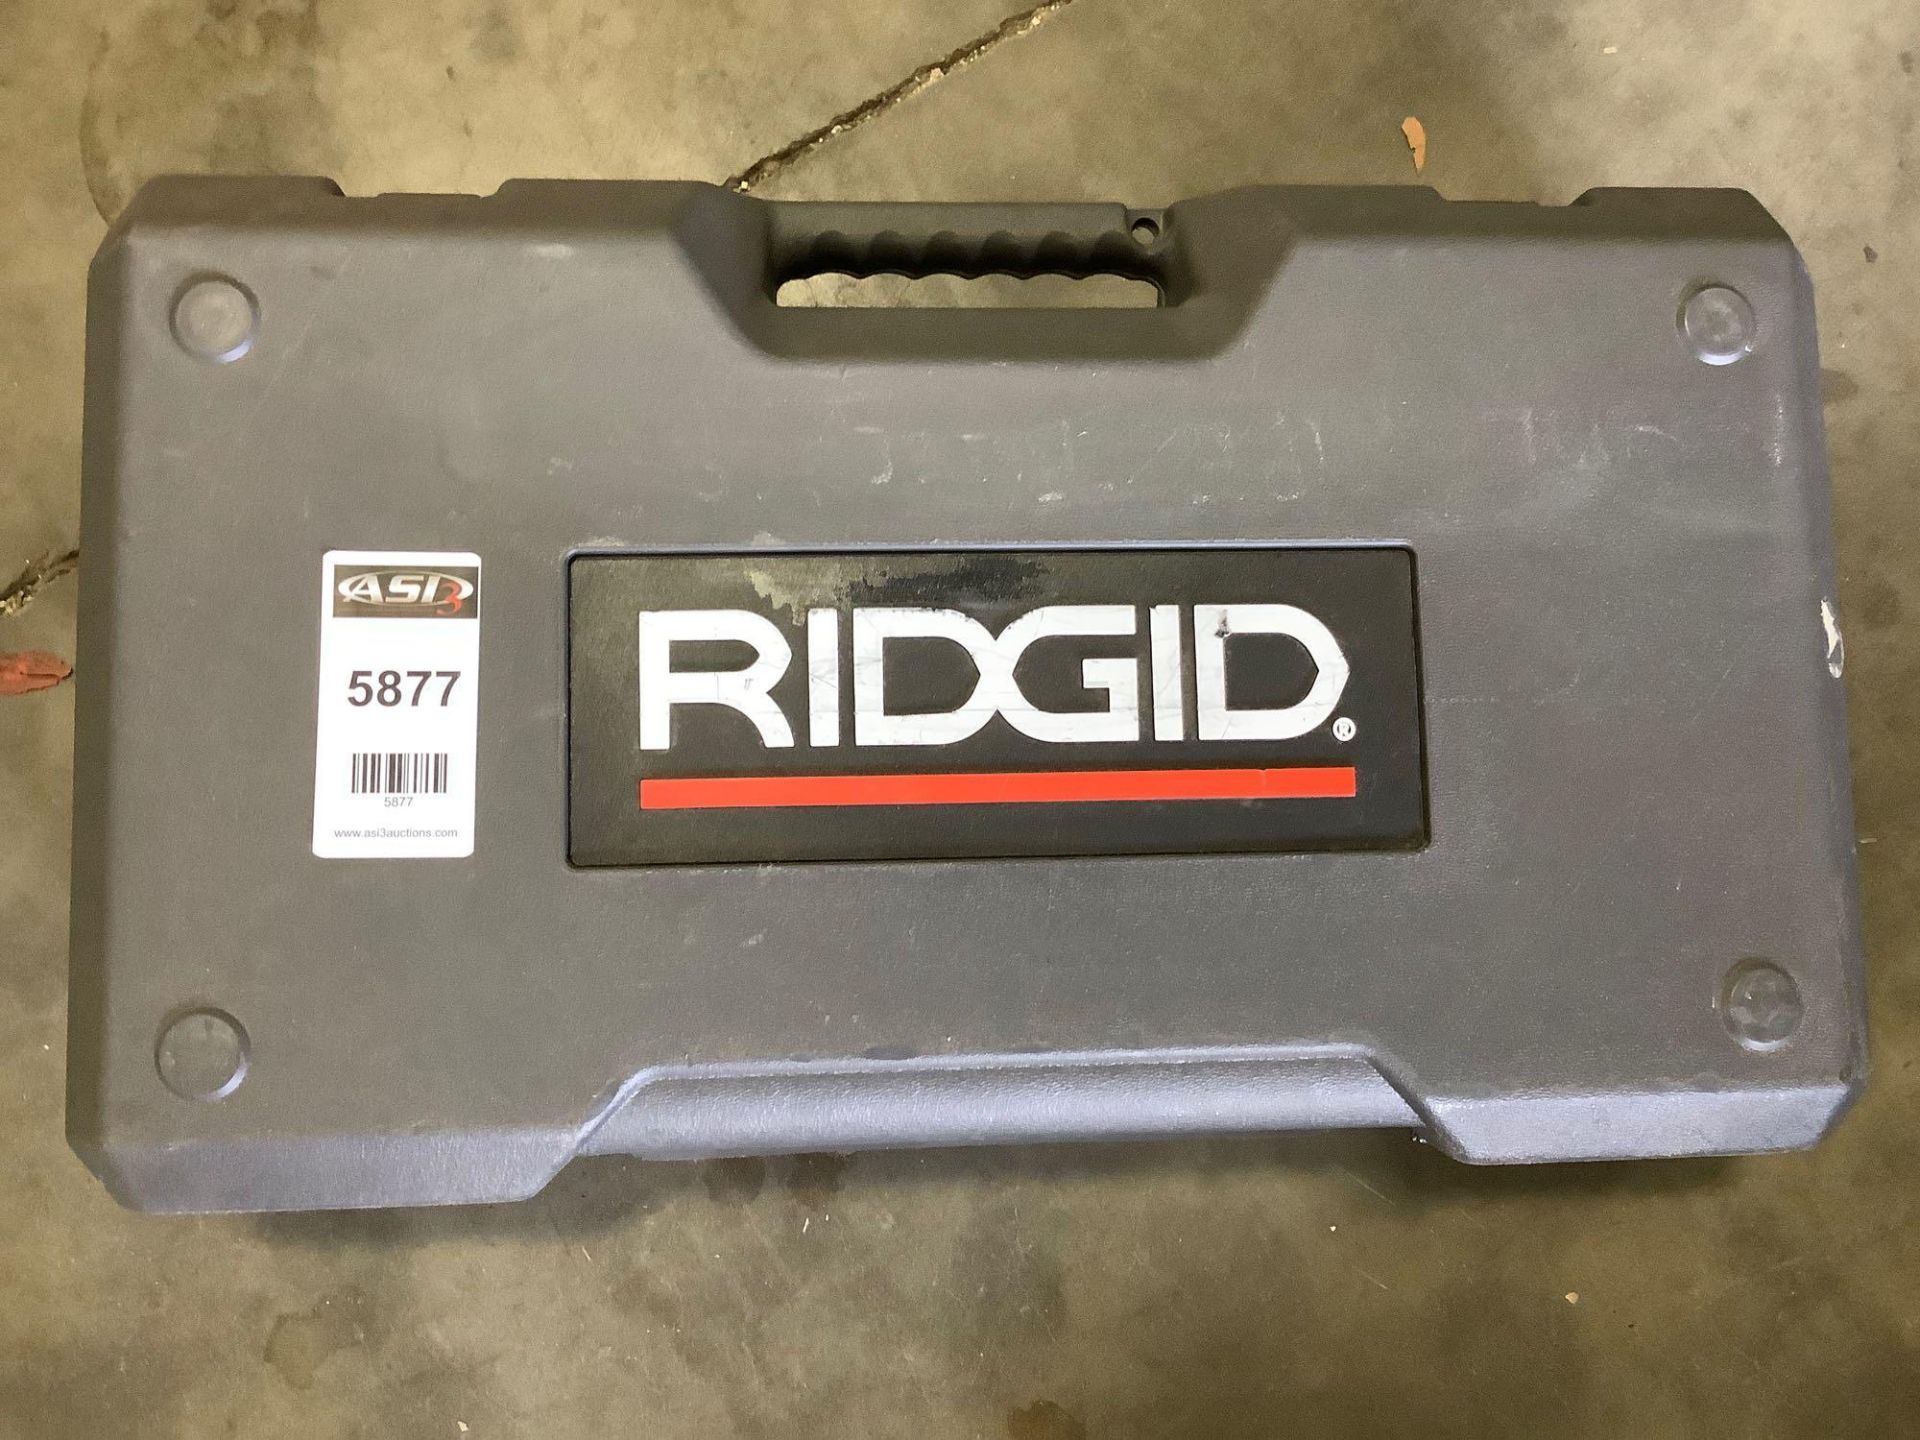 MANUAL RIDGID THREADER SET WITH CARRYING CASE - Image 5 of 6